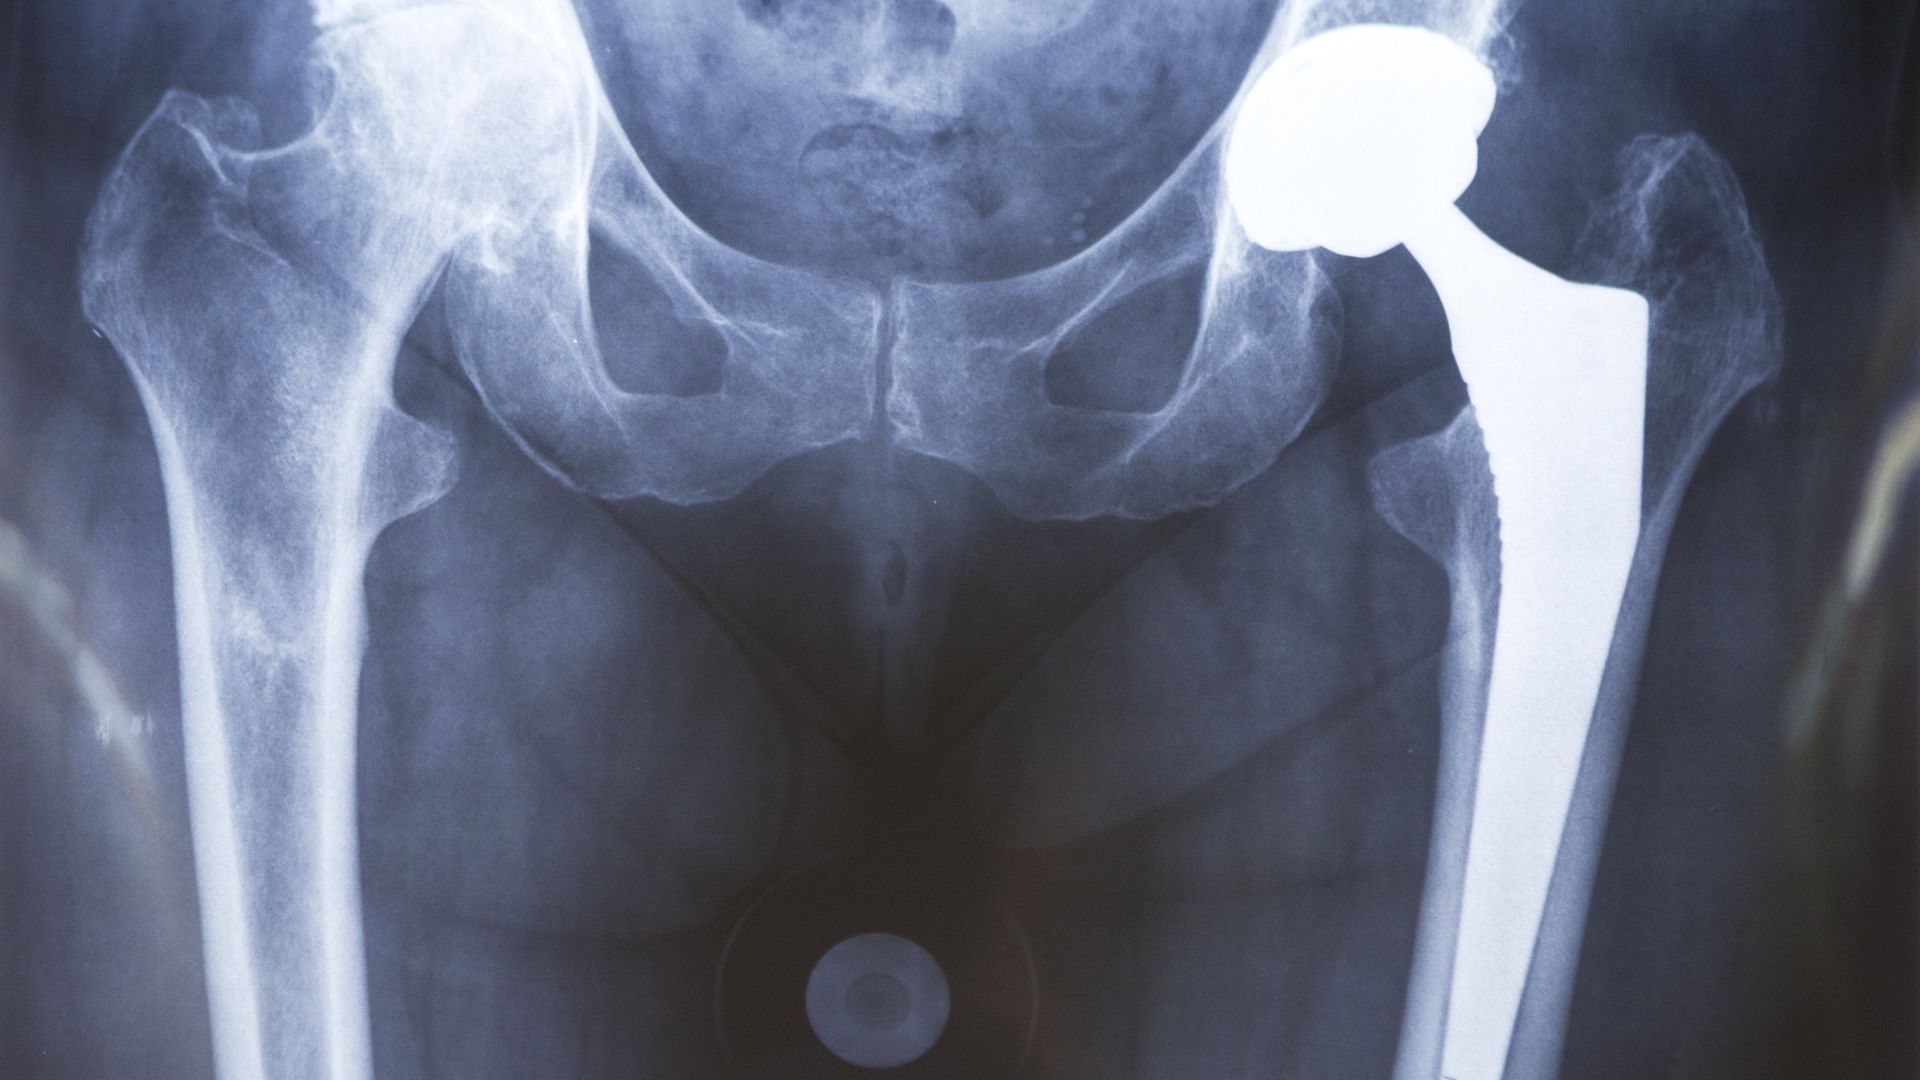 Hip Prosthesis, Surgery X-rays (Photo by: BSIP/Universal Images Group via Getty Images)